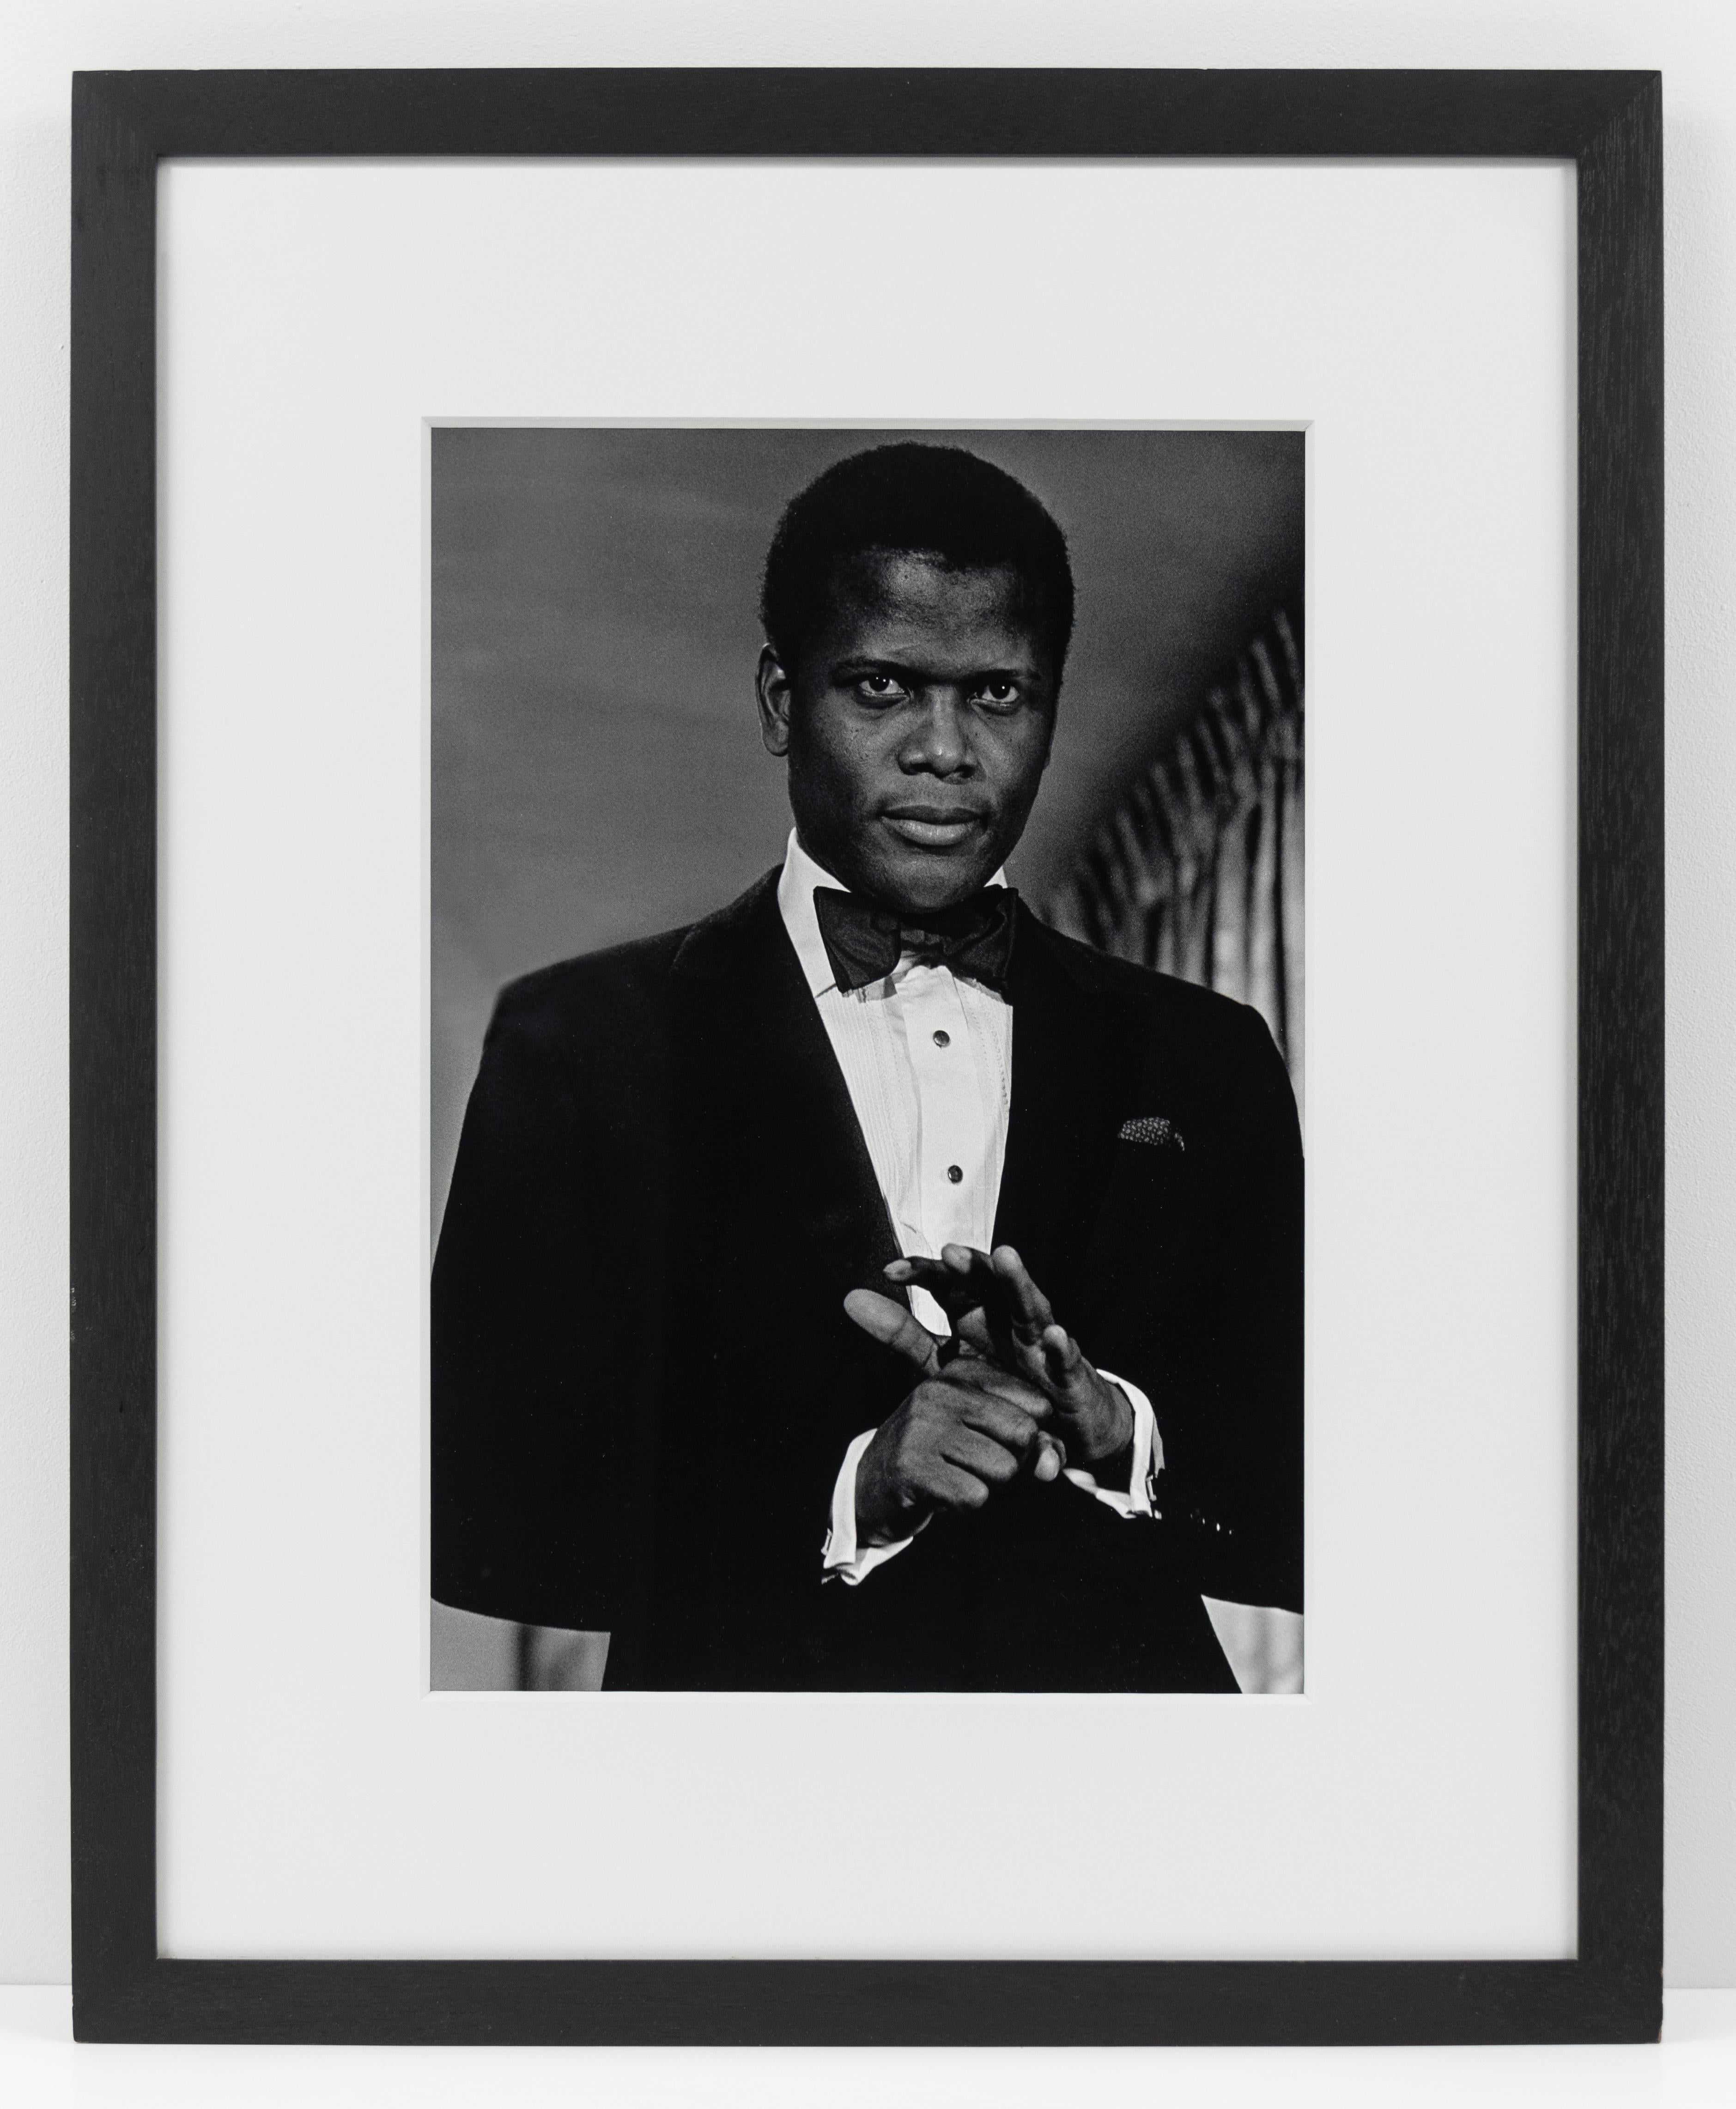 Sidney Poitier at the Oscars Where He Won Best Actor - Contemporary Photograph by Bob Adelman